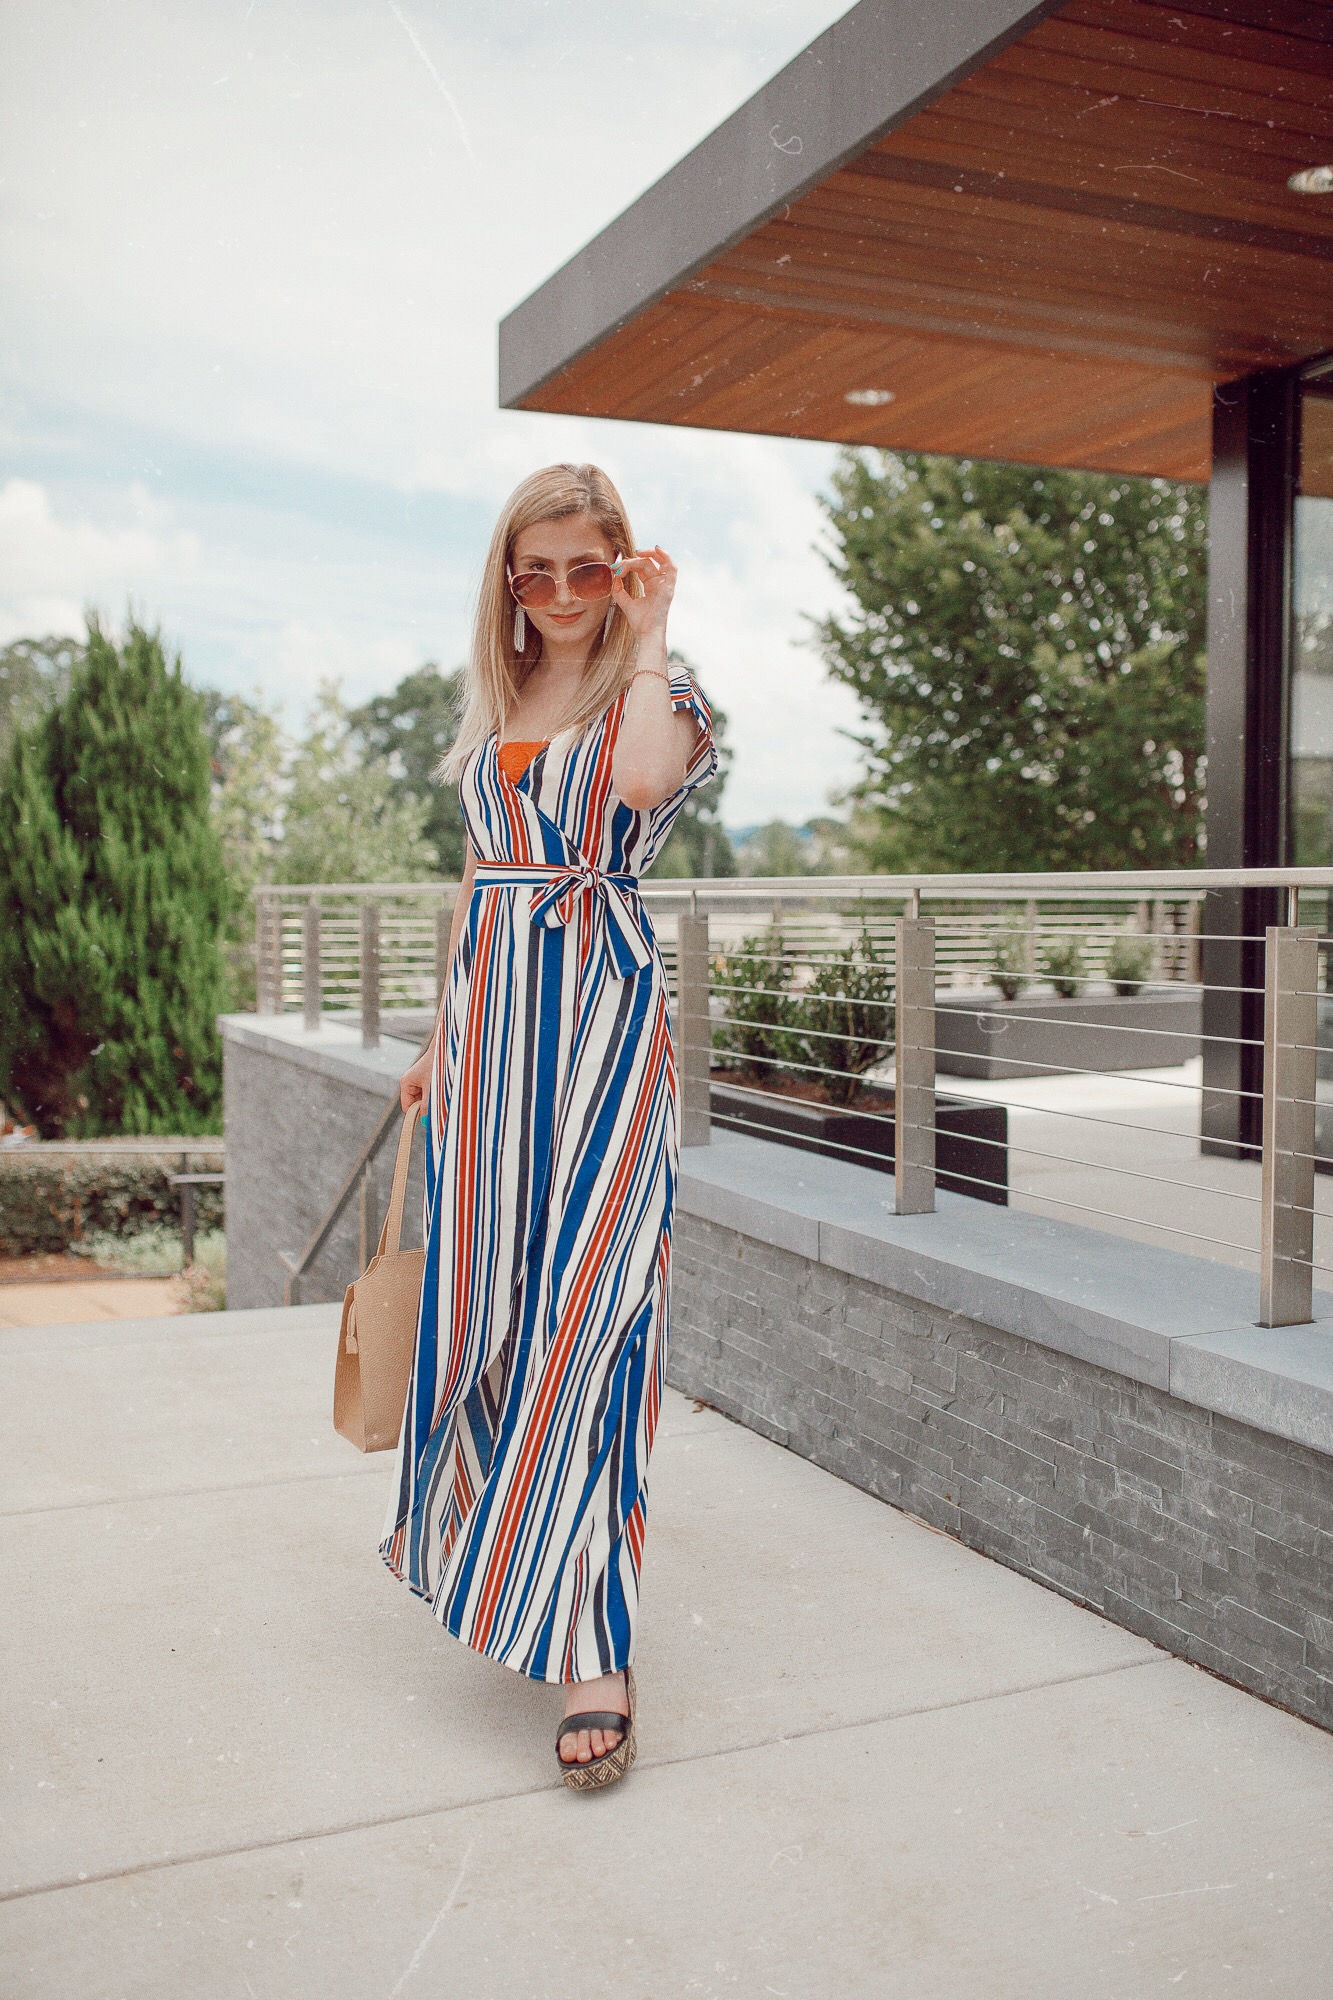 North Carolina fashion and lifestyle blogger Jessica Linn wearing a striped maxi wrap dress from Sugarhigh clothing, and platform sandals from Target.